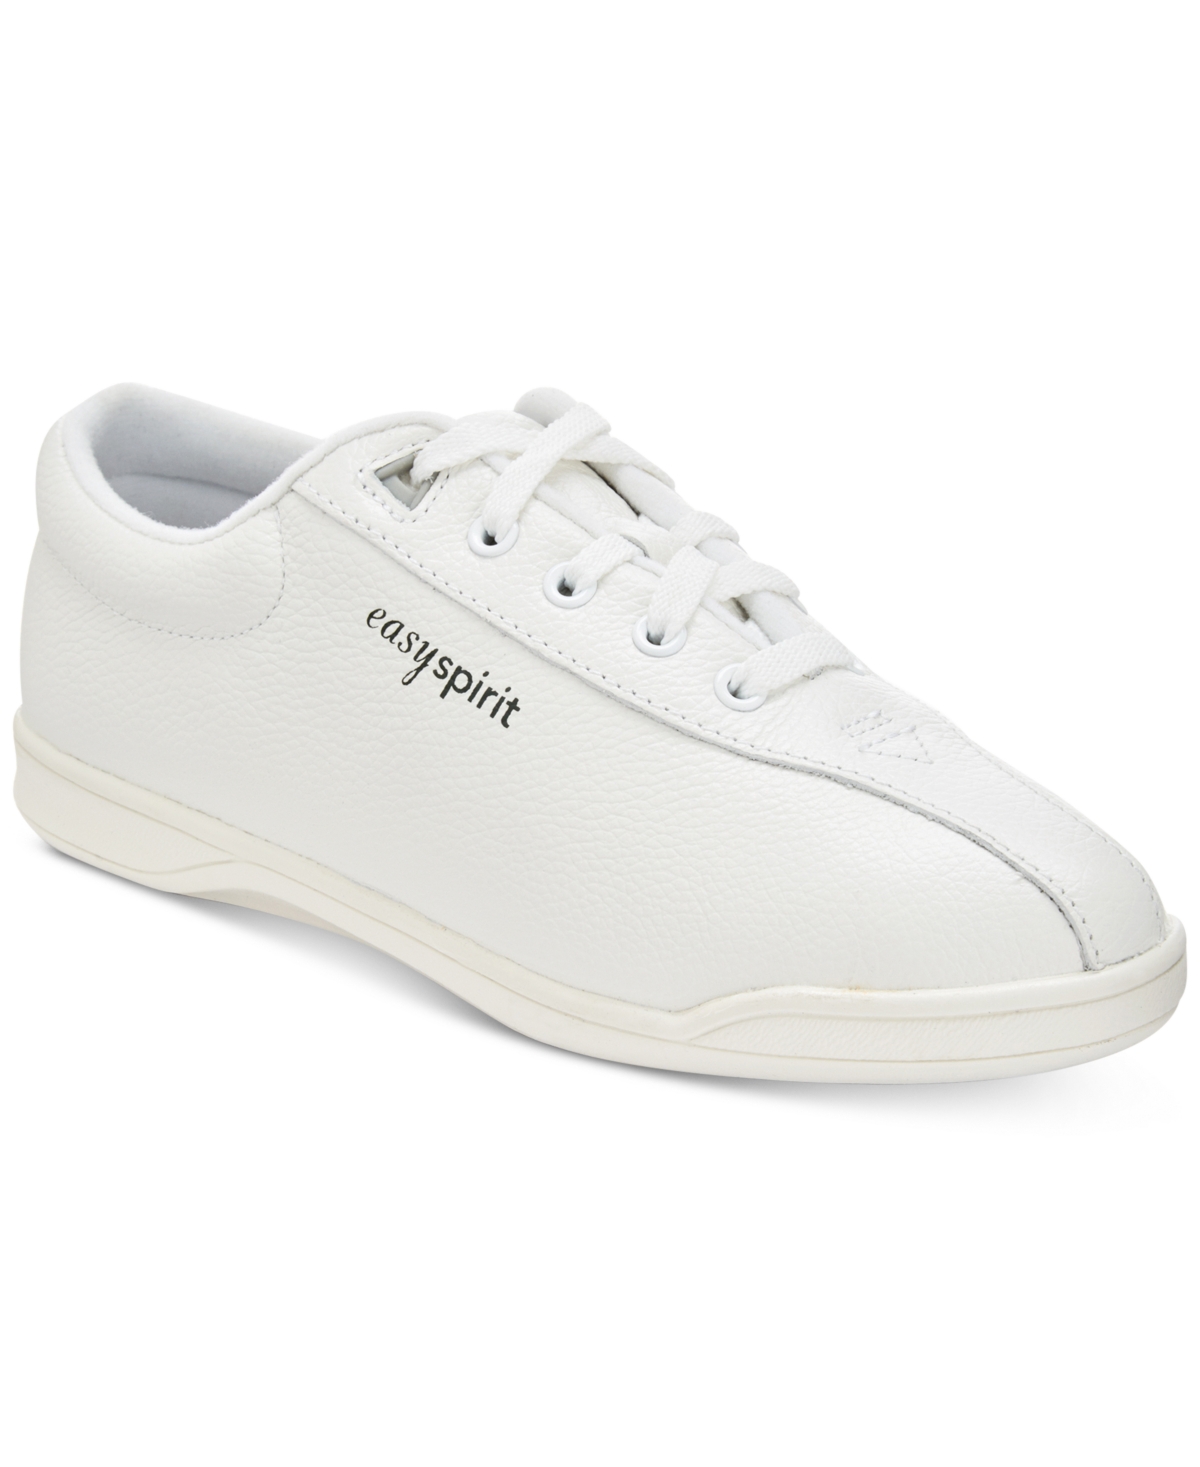 Women's Ap Casual Lace-Up Walking Sneakers - White Leather